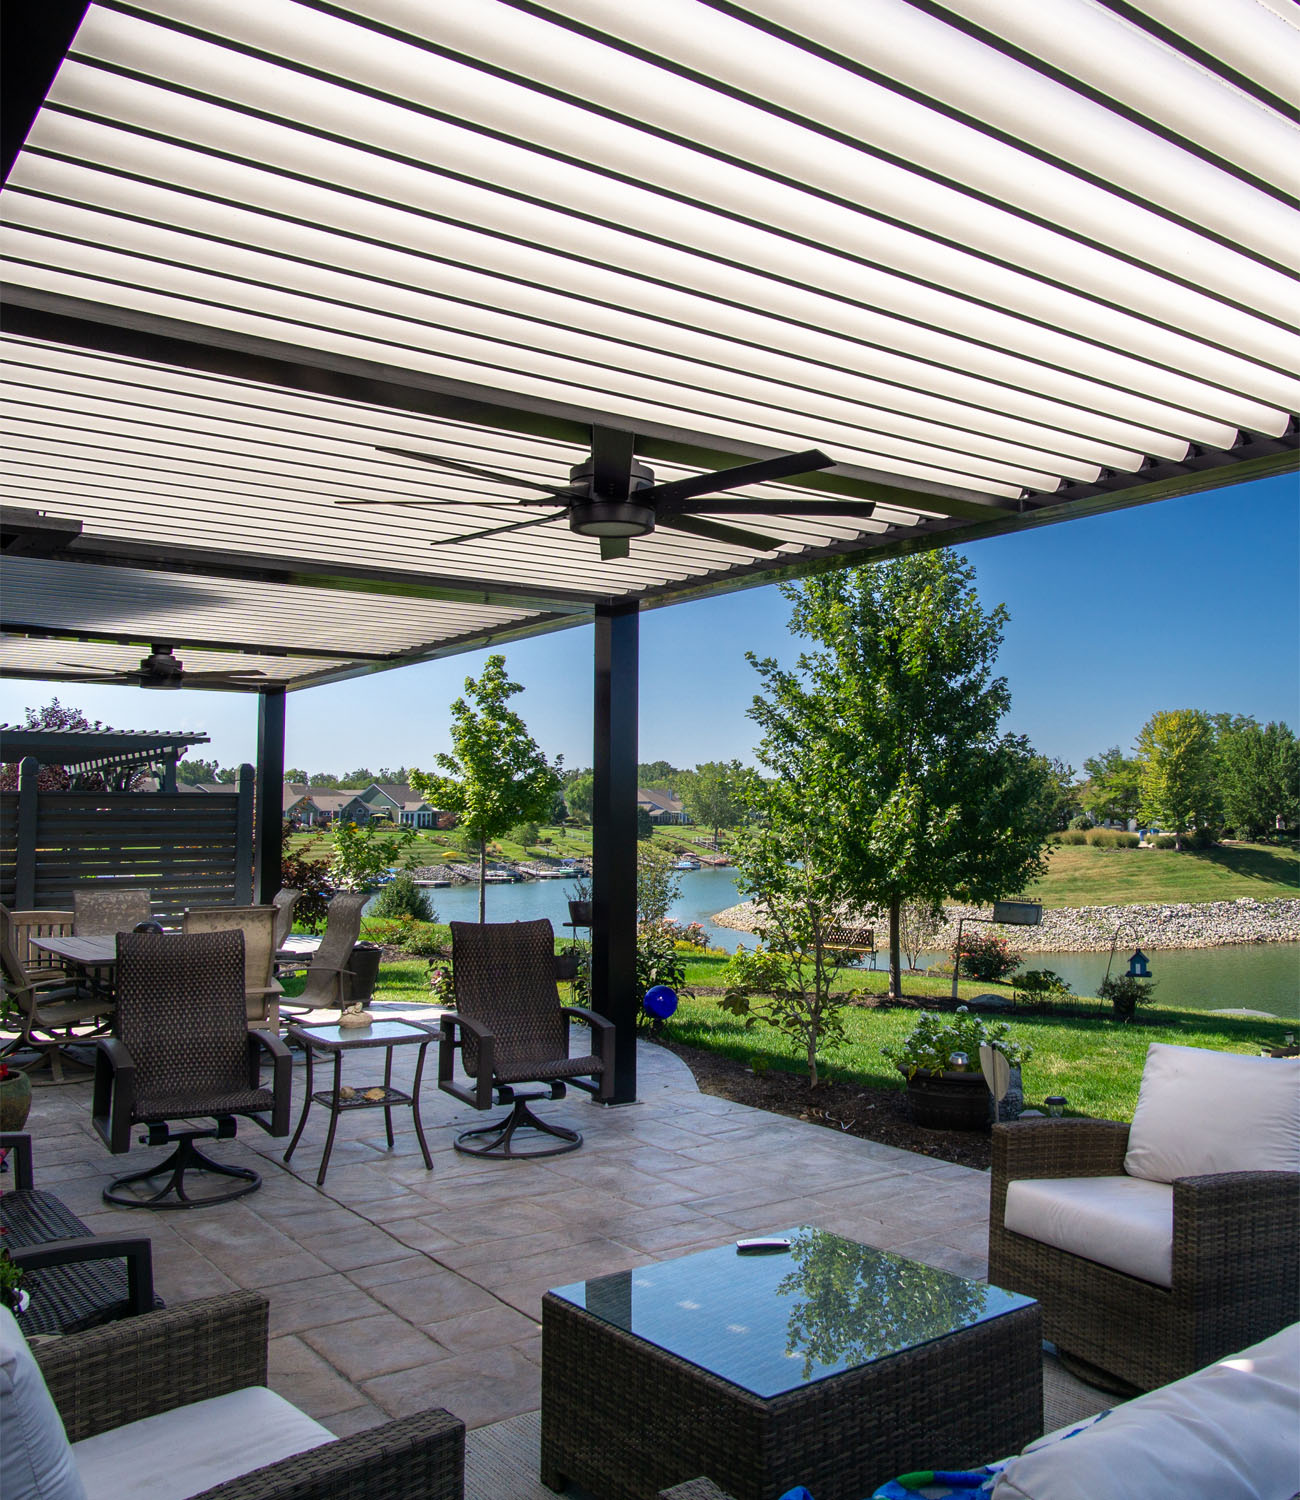 Outdoor furniture and a pergola provide shade with retractable canopies.  Direct sunlight or full shade can be options with a pergola.